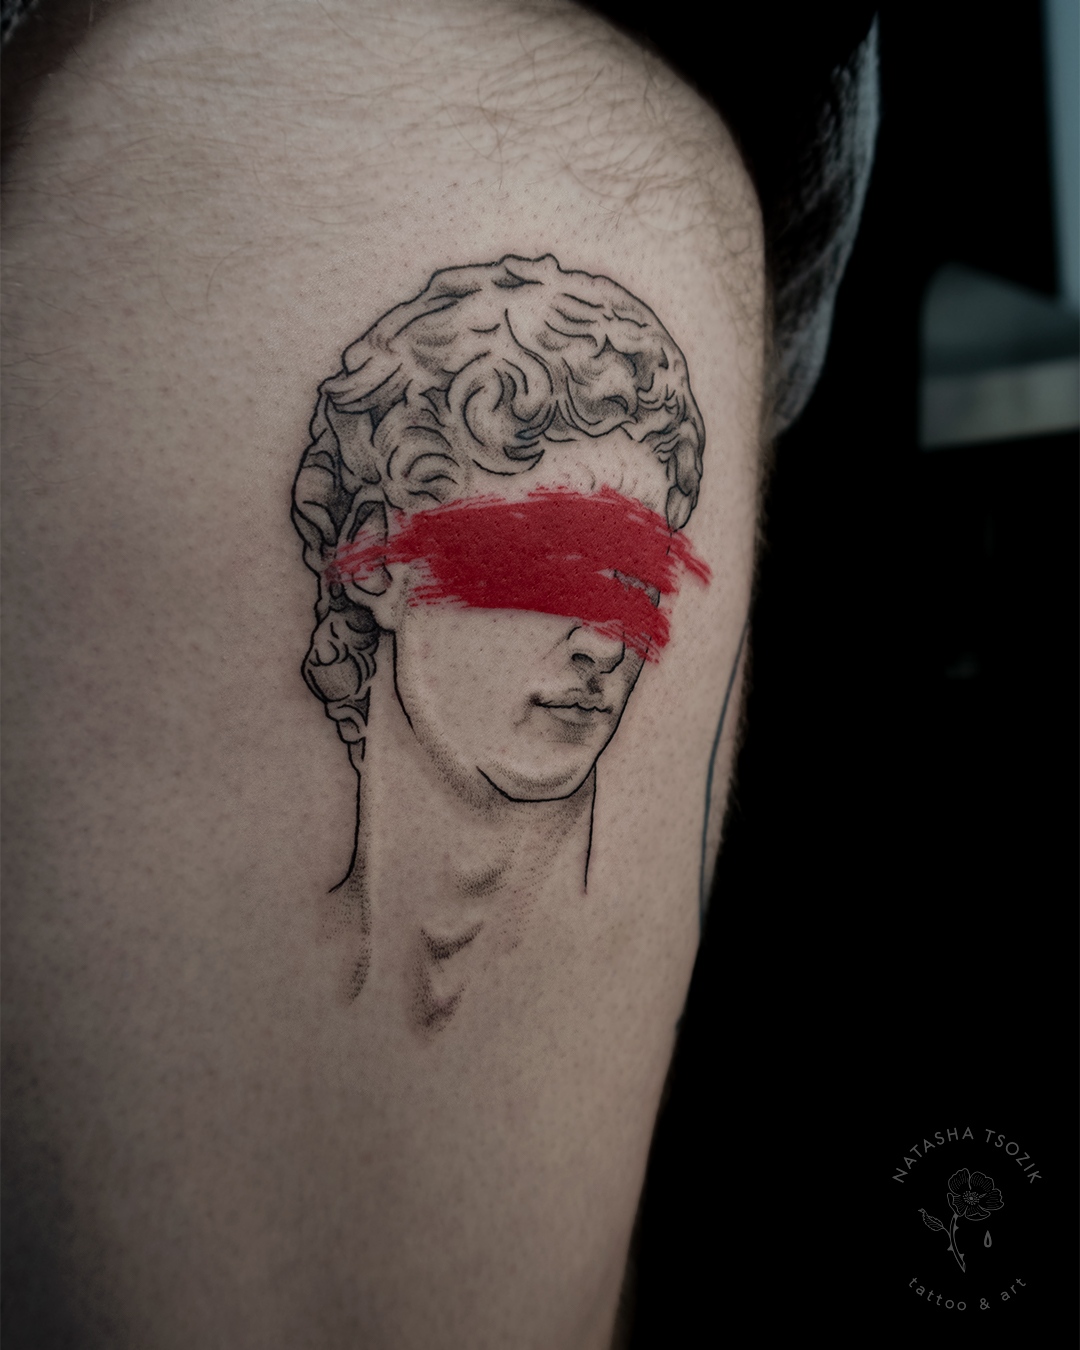 Thigh tattoo – David with a red blindfold.